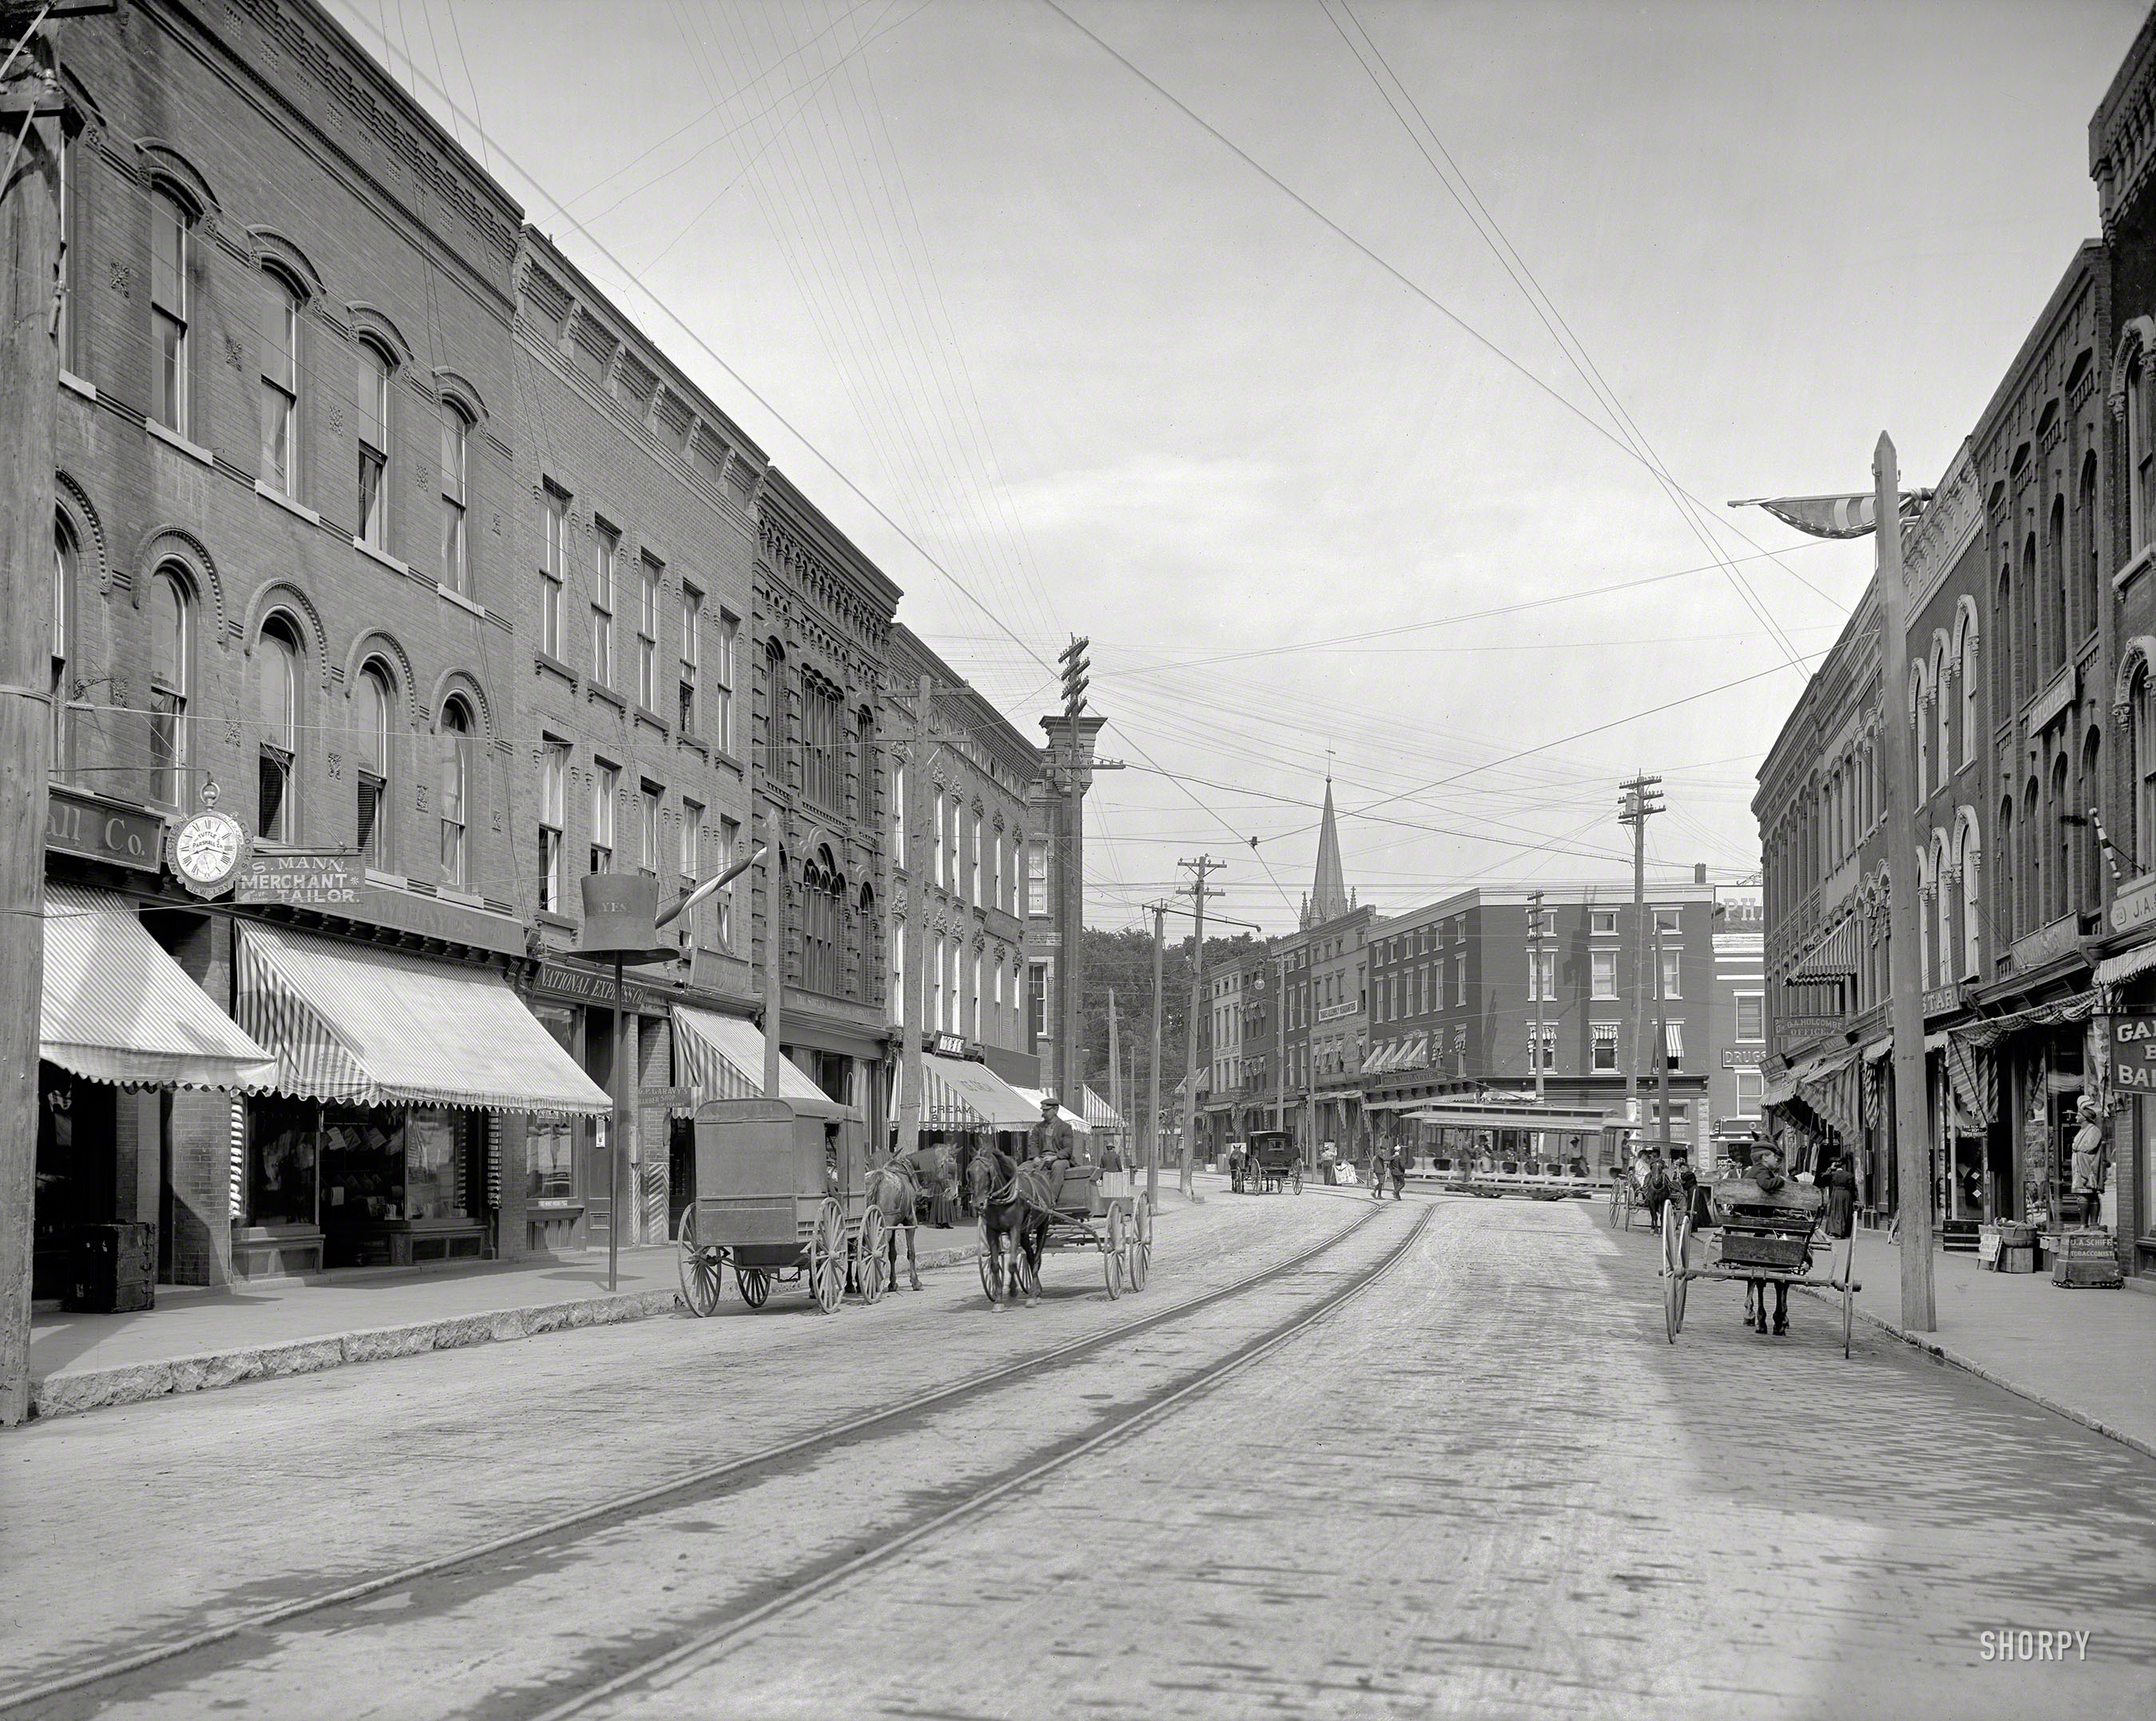 Circa 1906. "Margaret Street -- Plattsburgh, New York." Once again, it's 8:17. 8x10 inch dry plate glass negative, Detroit Publishing Company. View full size.